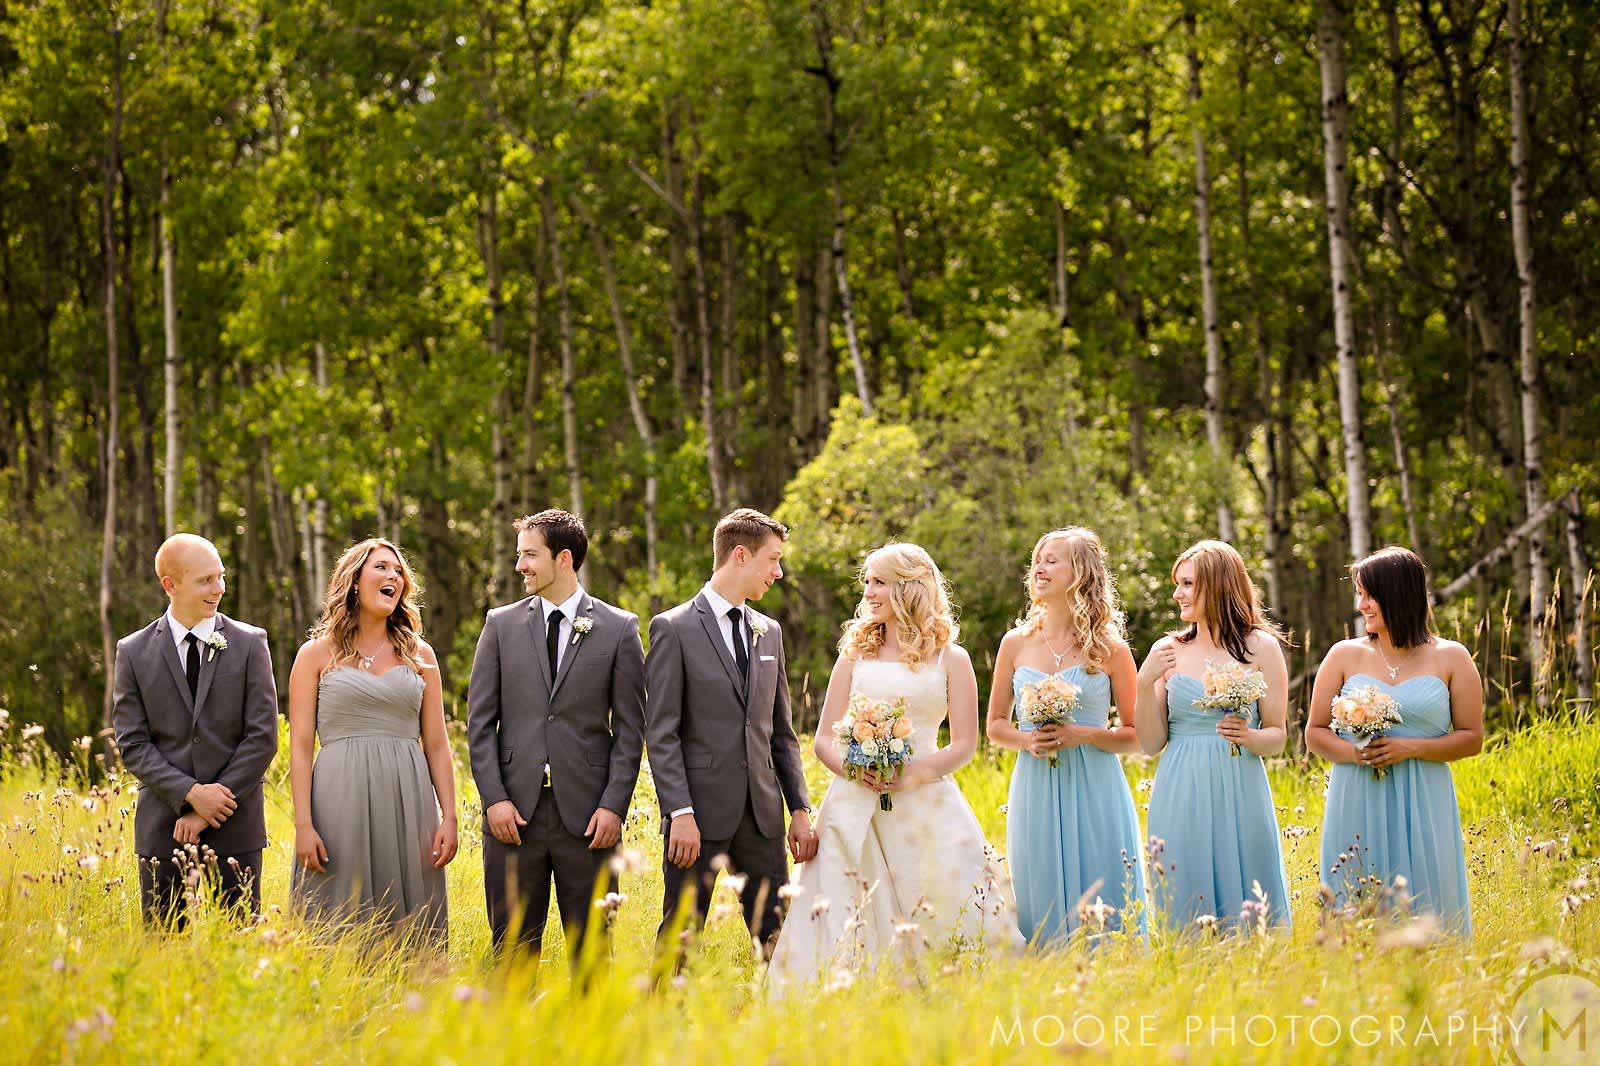 How To Style Mixed Gender Bridal Parties